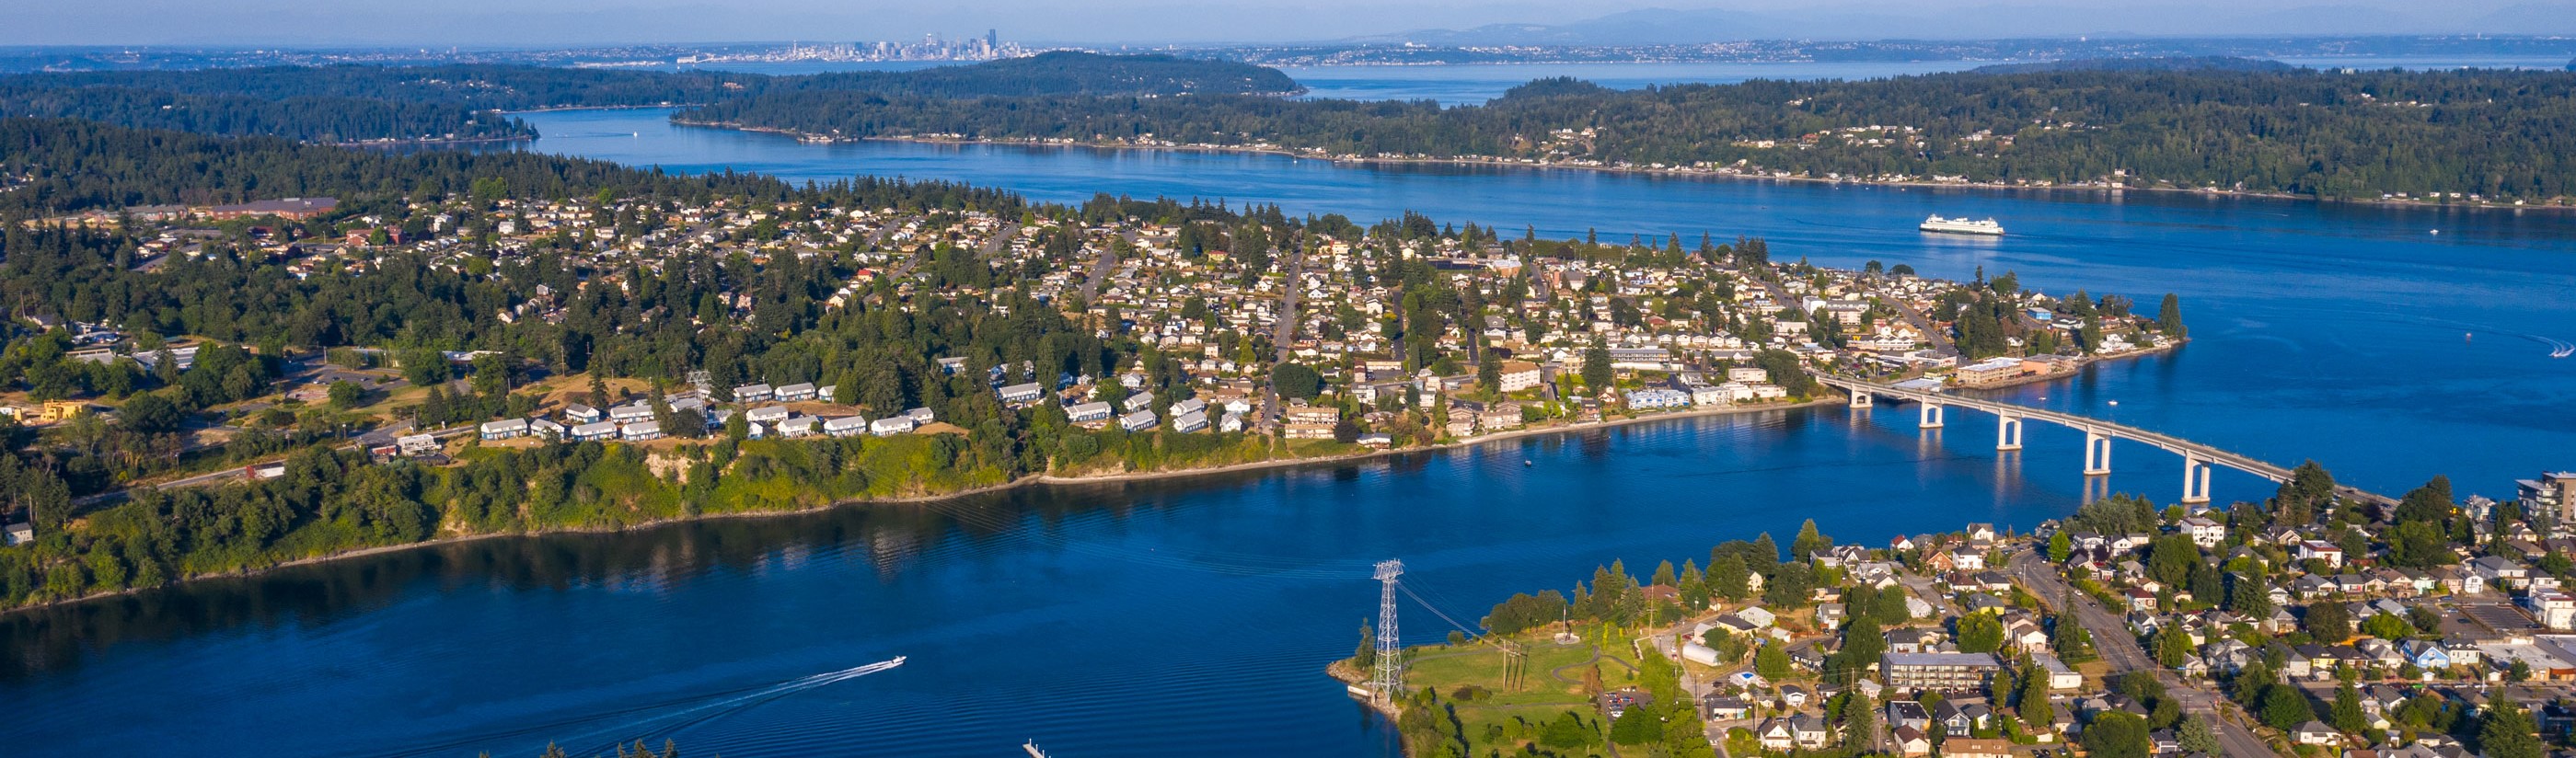 areal of puget sound, homes, bridges, ferry and seatle in the distance